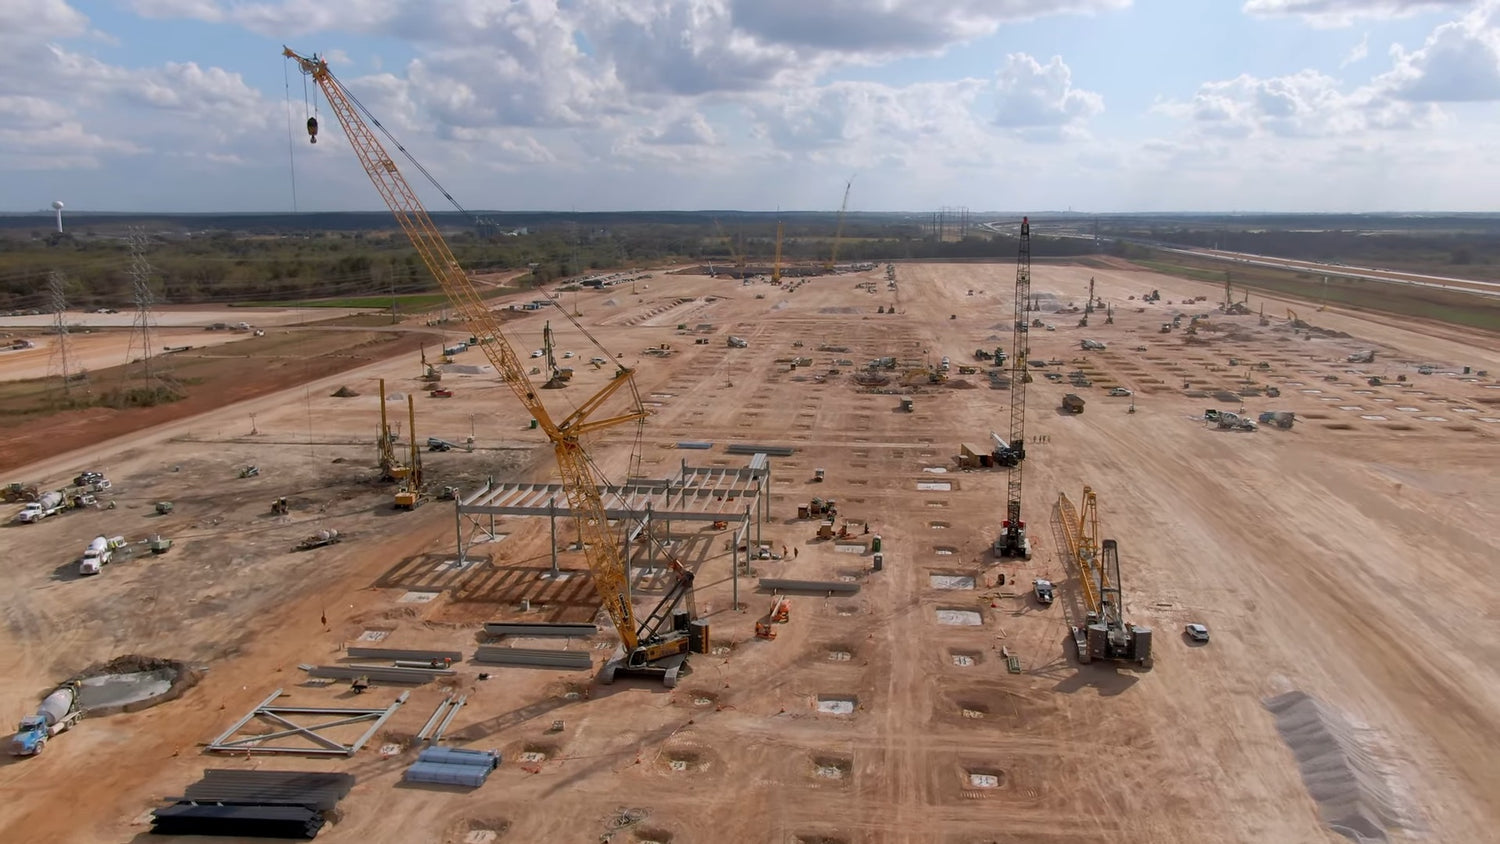 Tesla Giga Texas Shifts into Elon Speed with 24/7 Construction Crews, Could Test Production by May 2021